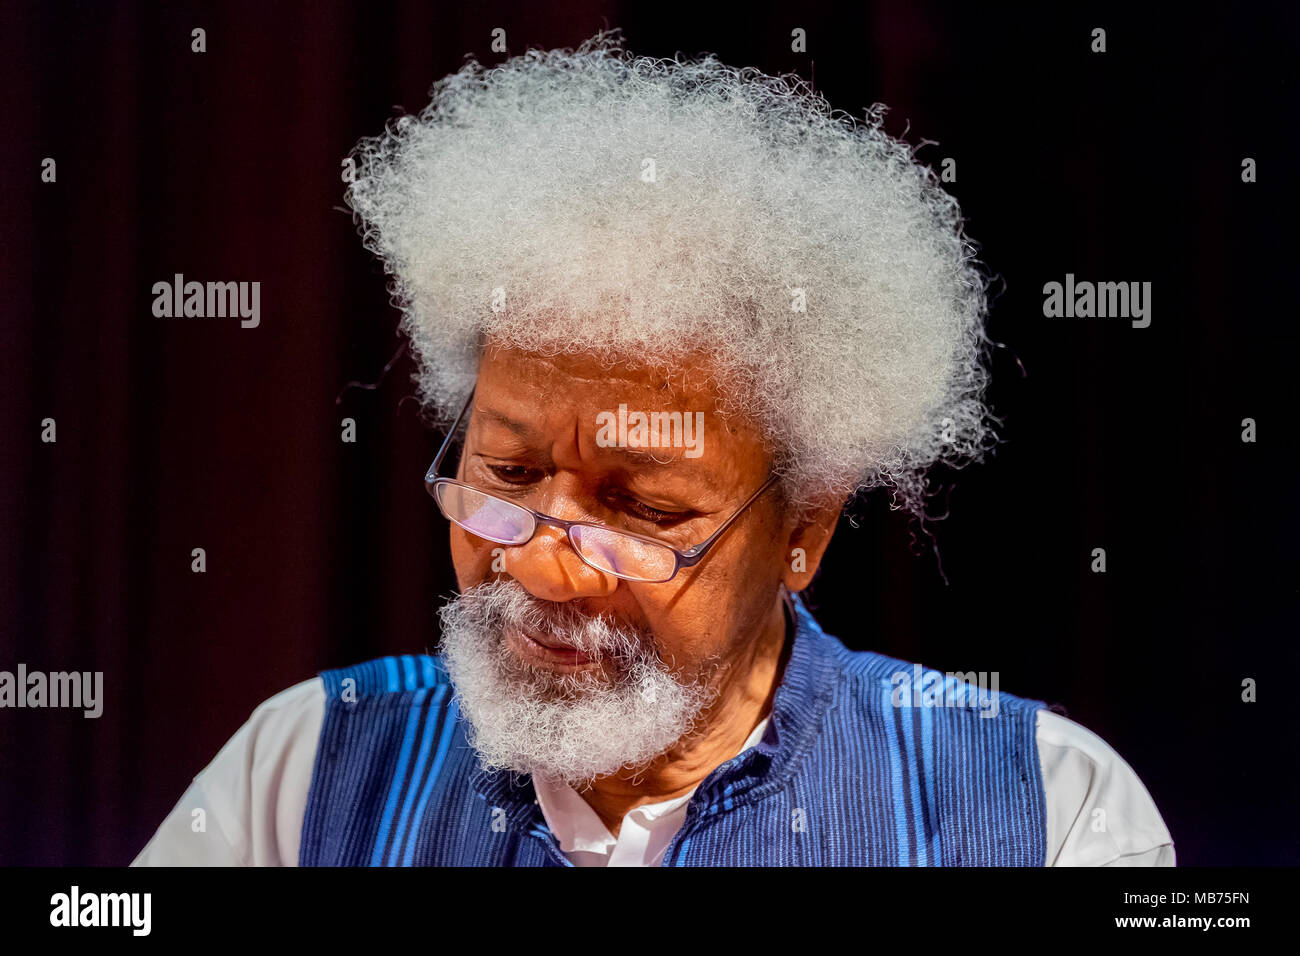 Venice, ITALY. 7 April, 2018. Nigerian Wole Soyinka playwright, poet and essayist. He was awarded the 1986 Nobel Prize in Literature, the first African to be honoured in that category.  Attends a photocall during Incroci di Civiltà International Literature Festival on April 7, 2018 in Venice, Italy.© Stefano Mazzola/Awakening/Alamy Live News Stock Photo